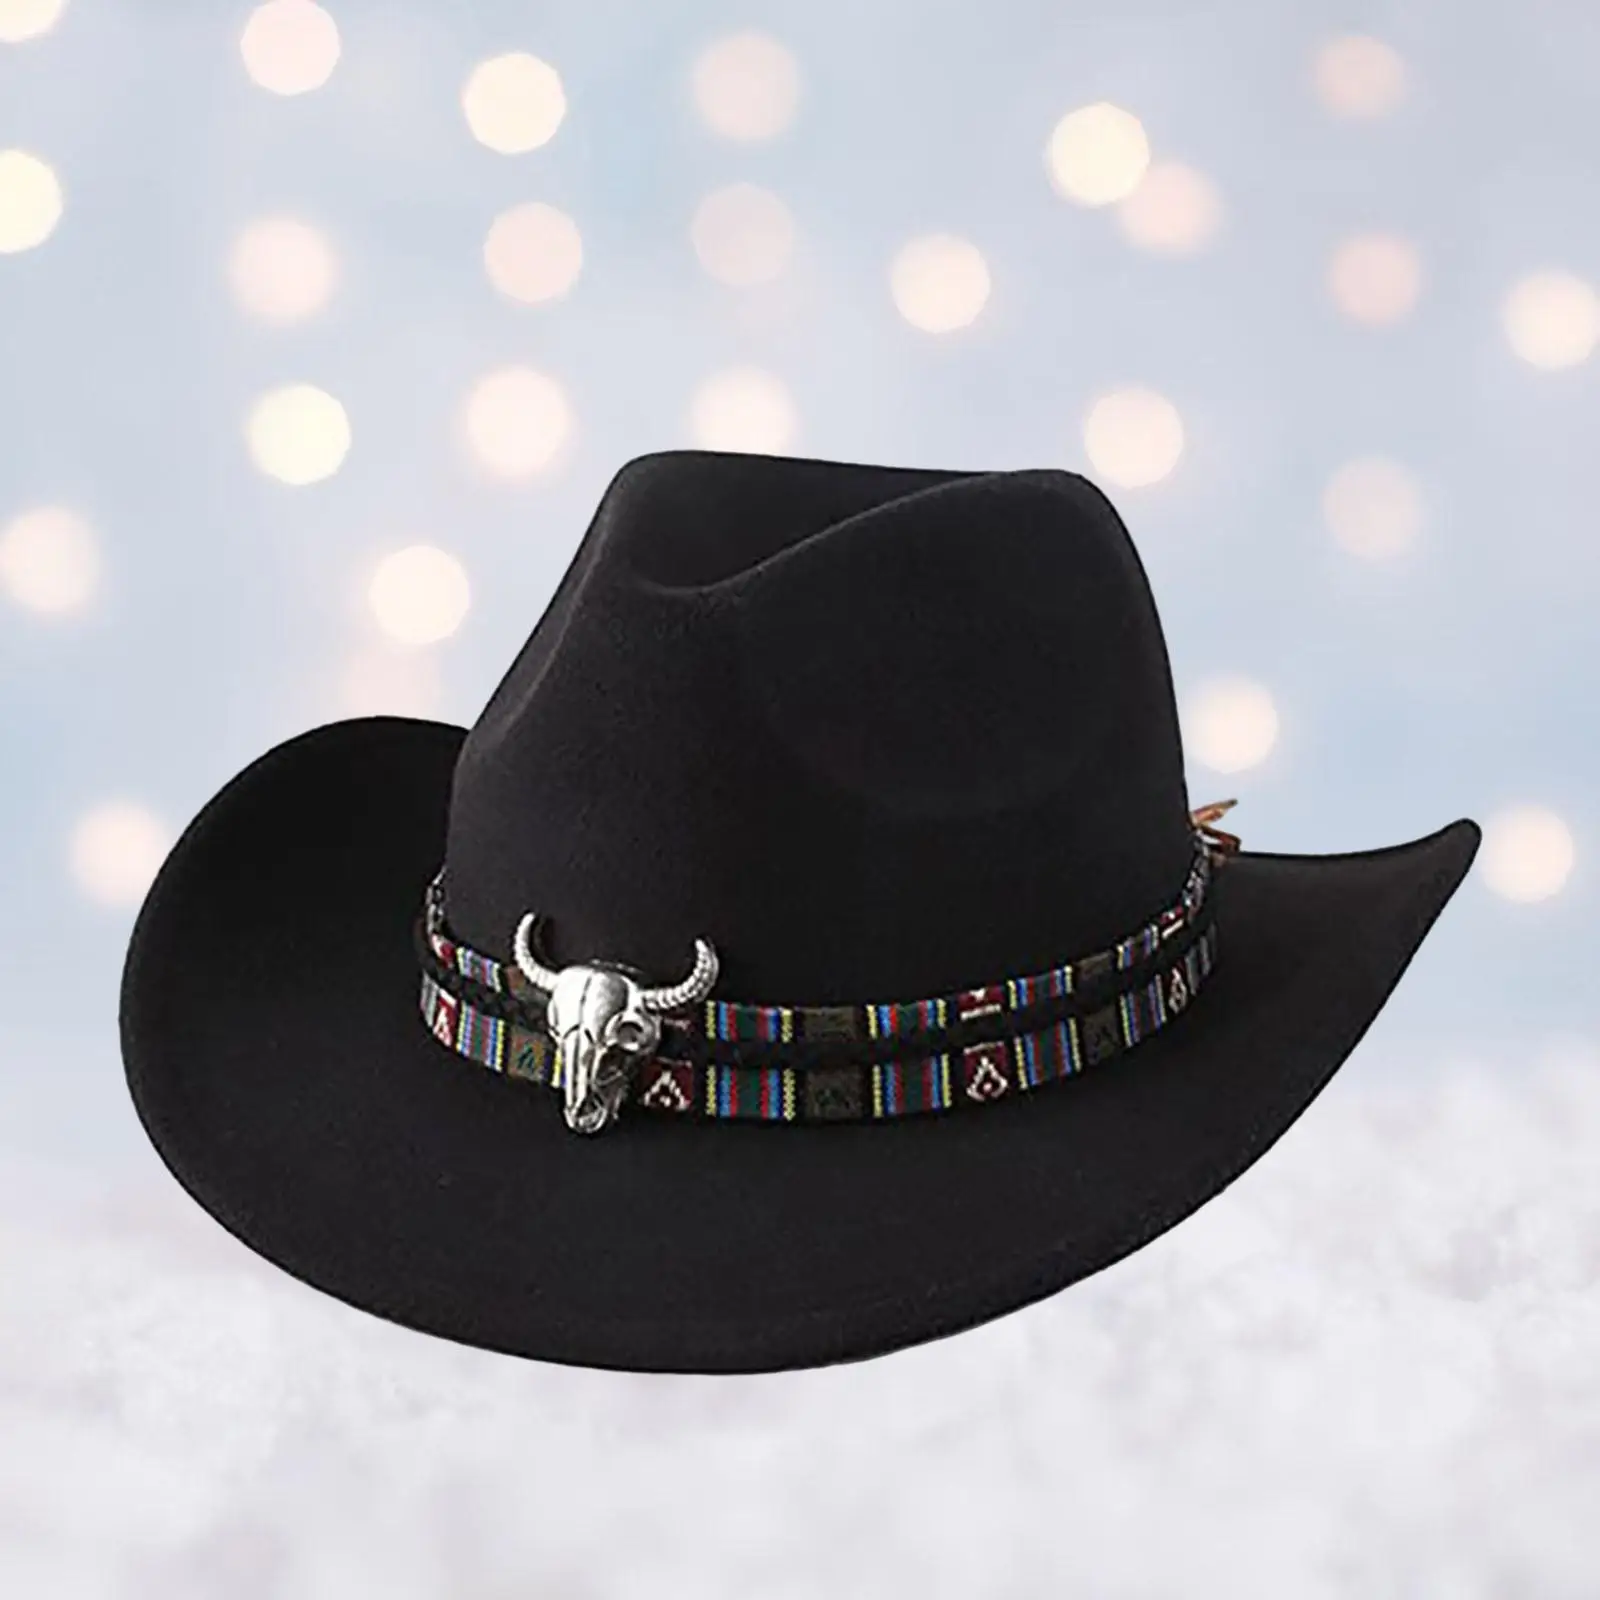 Cowgirl Hat Comfortable with Pull On Closure Trendy black for Autumn